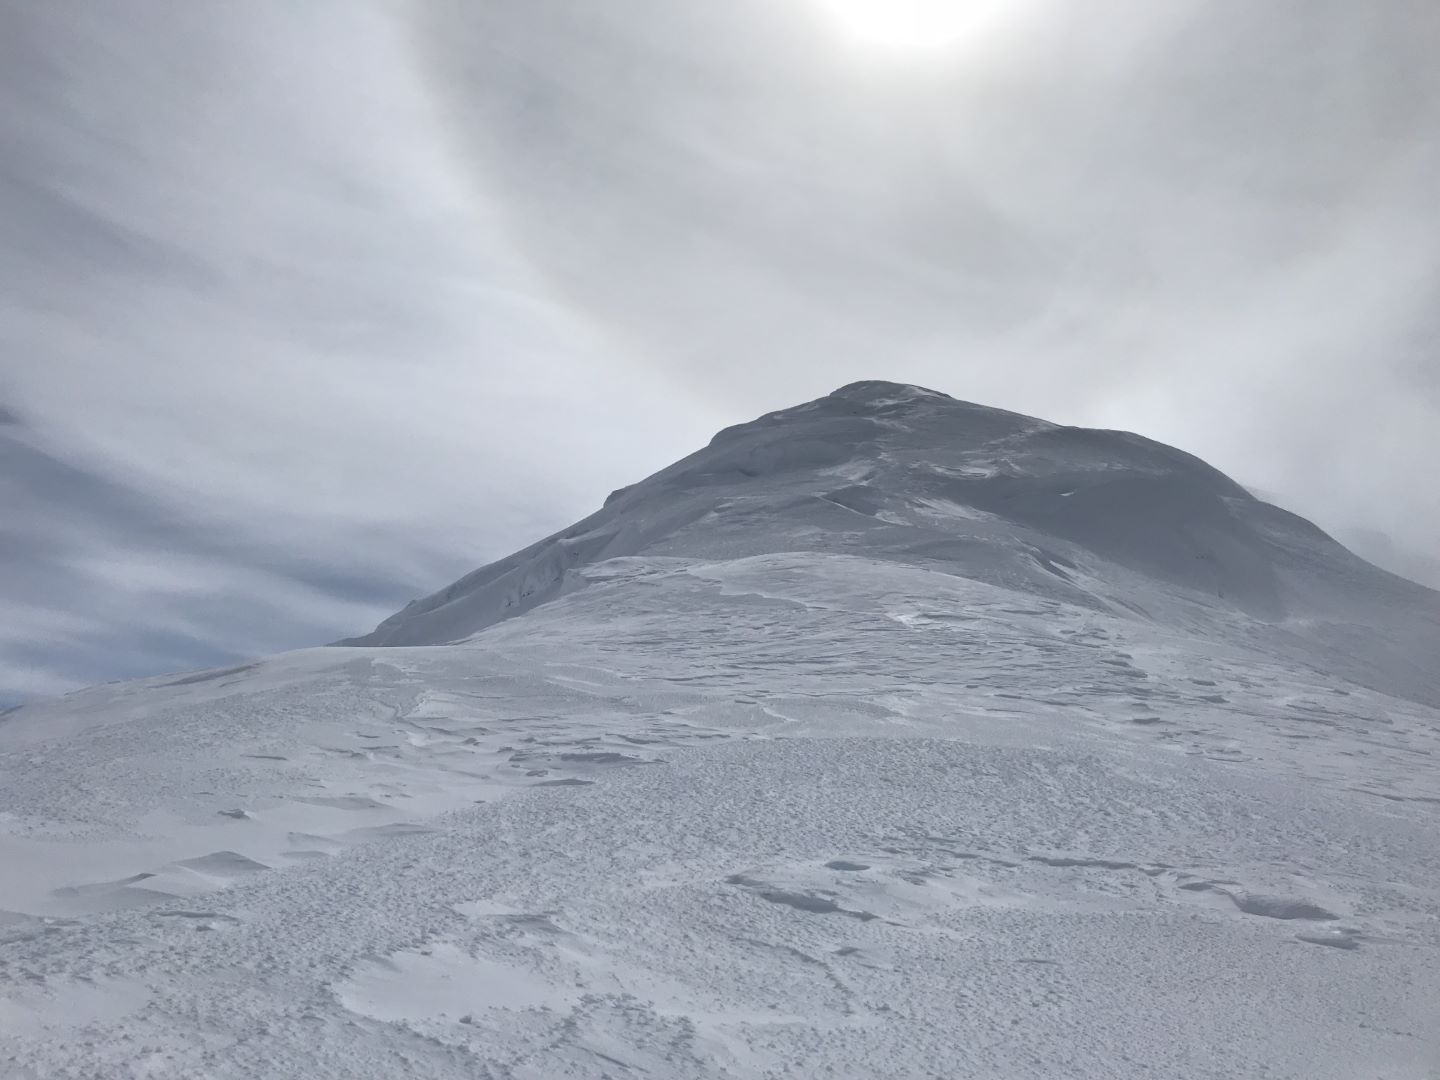 Looking south to the summit of 12525 ft Kahiltna Dome